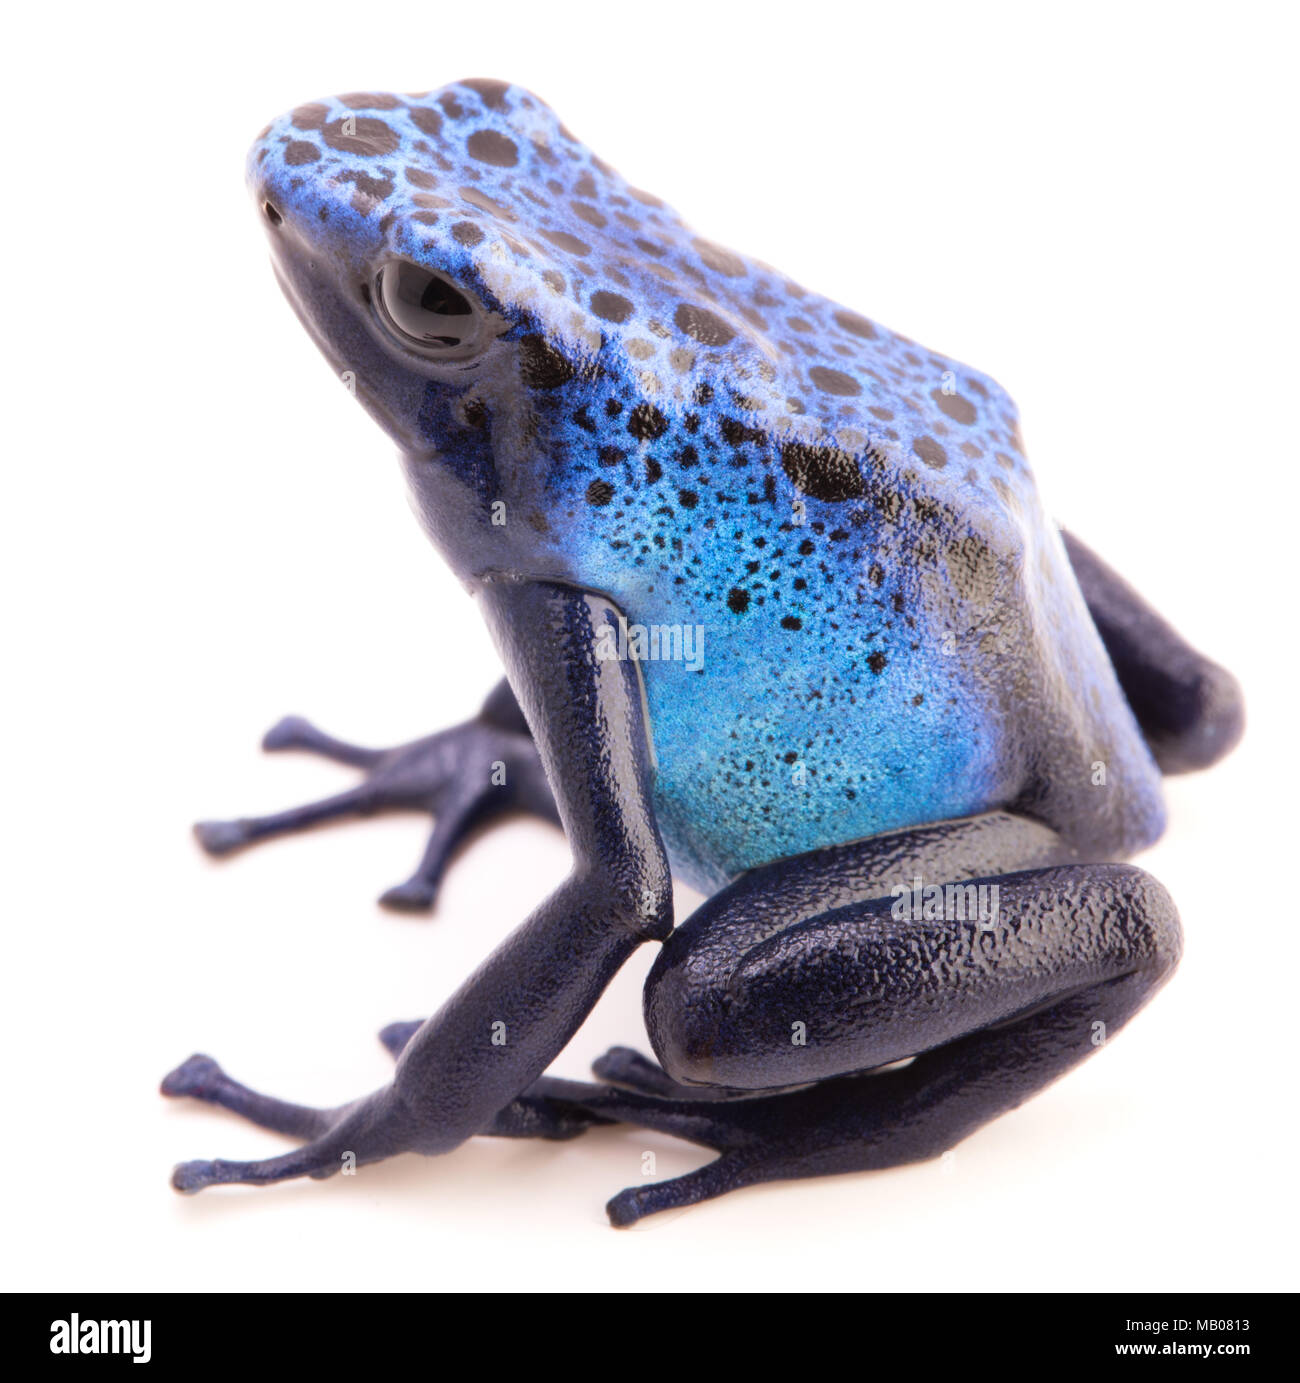 Dendrobates azureus, poison dart or arrow frog from the tropical Amazon rain forest in Suriname. A vivid blue animal isolated on a white background. Stock Photo